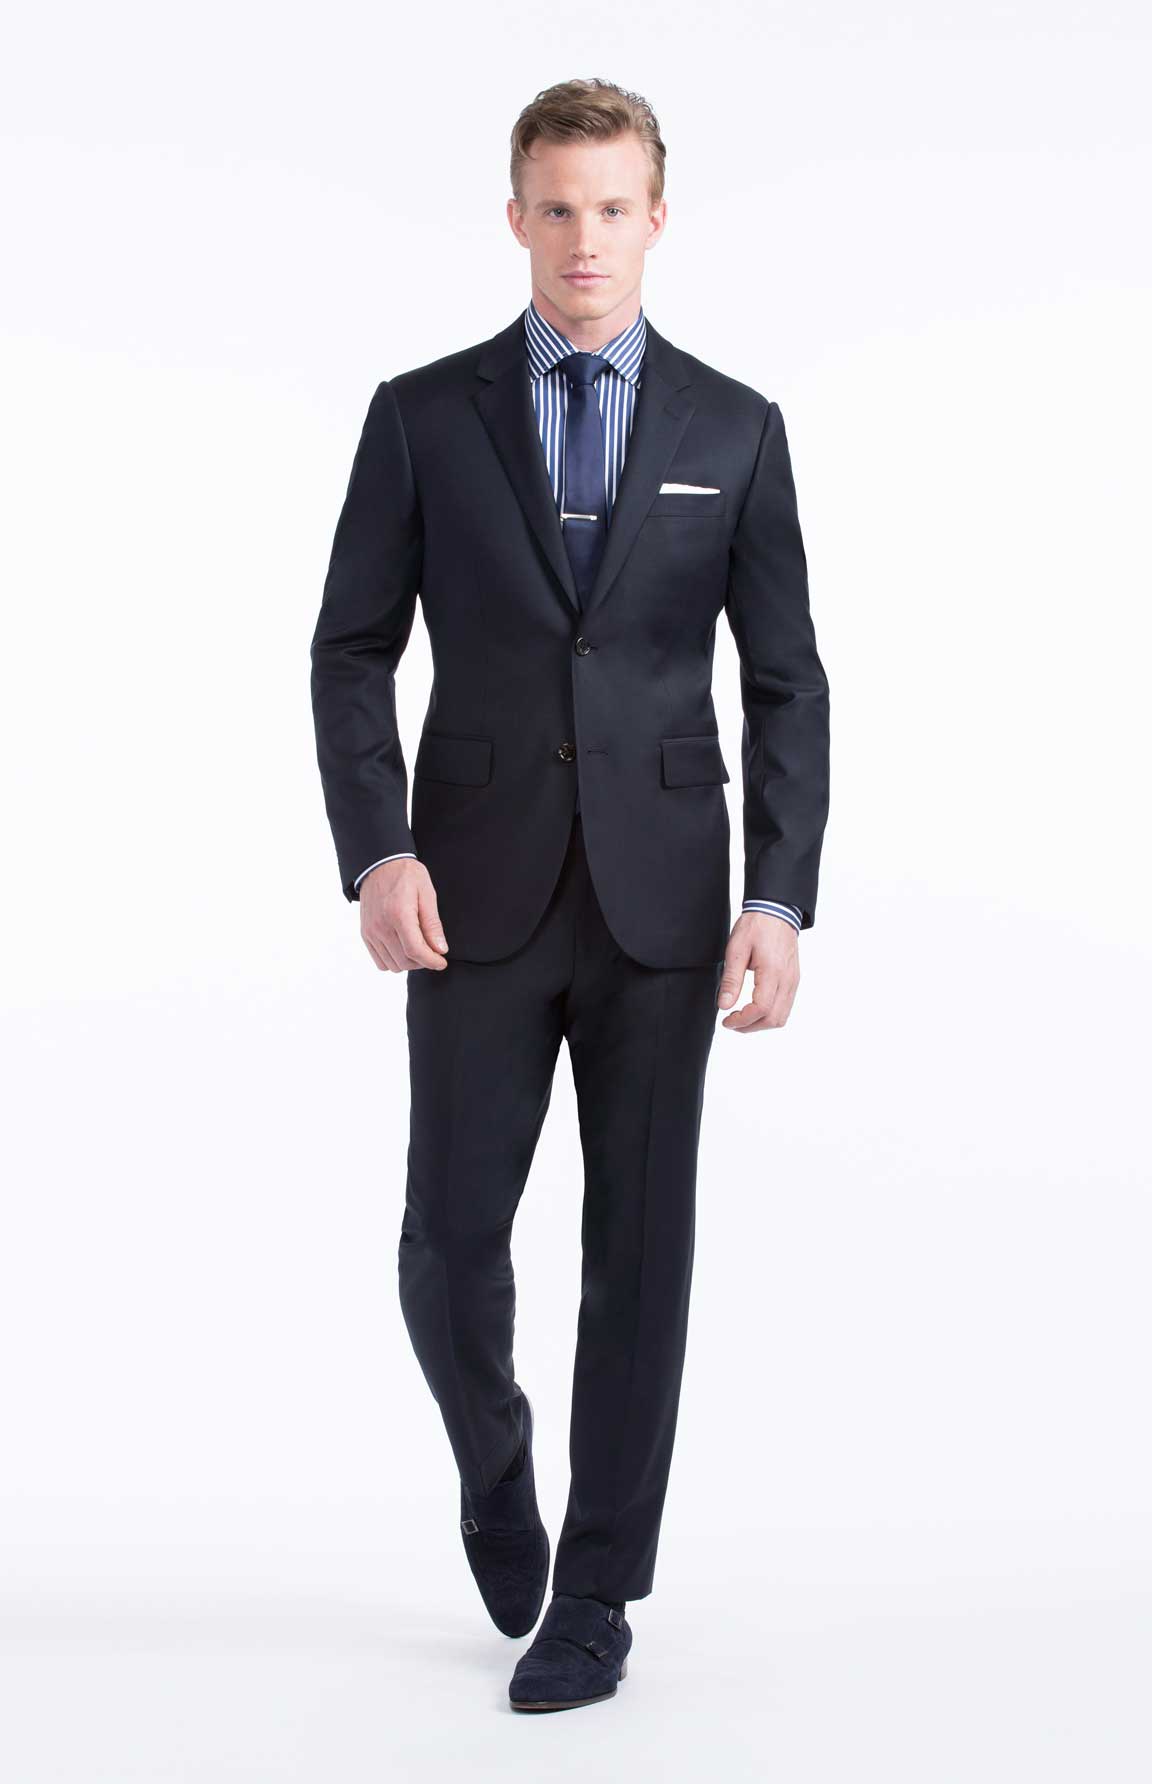 6 Classics Every Man Should Own: Navy Suit